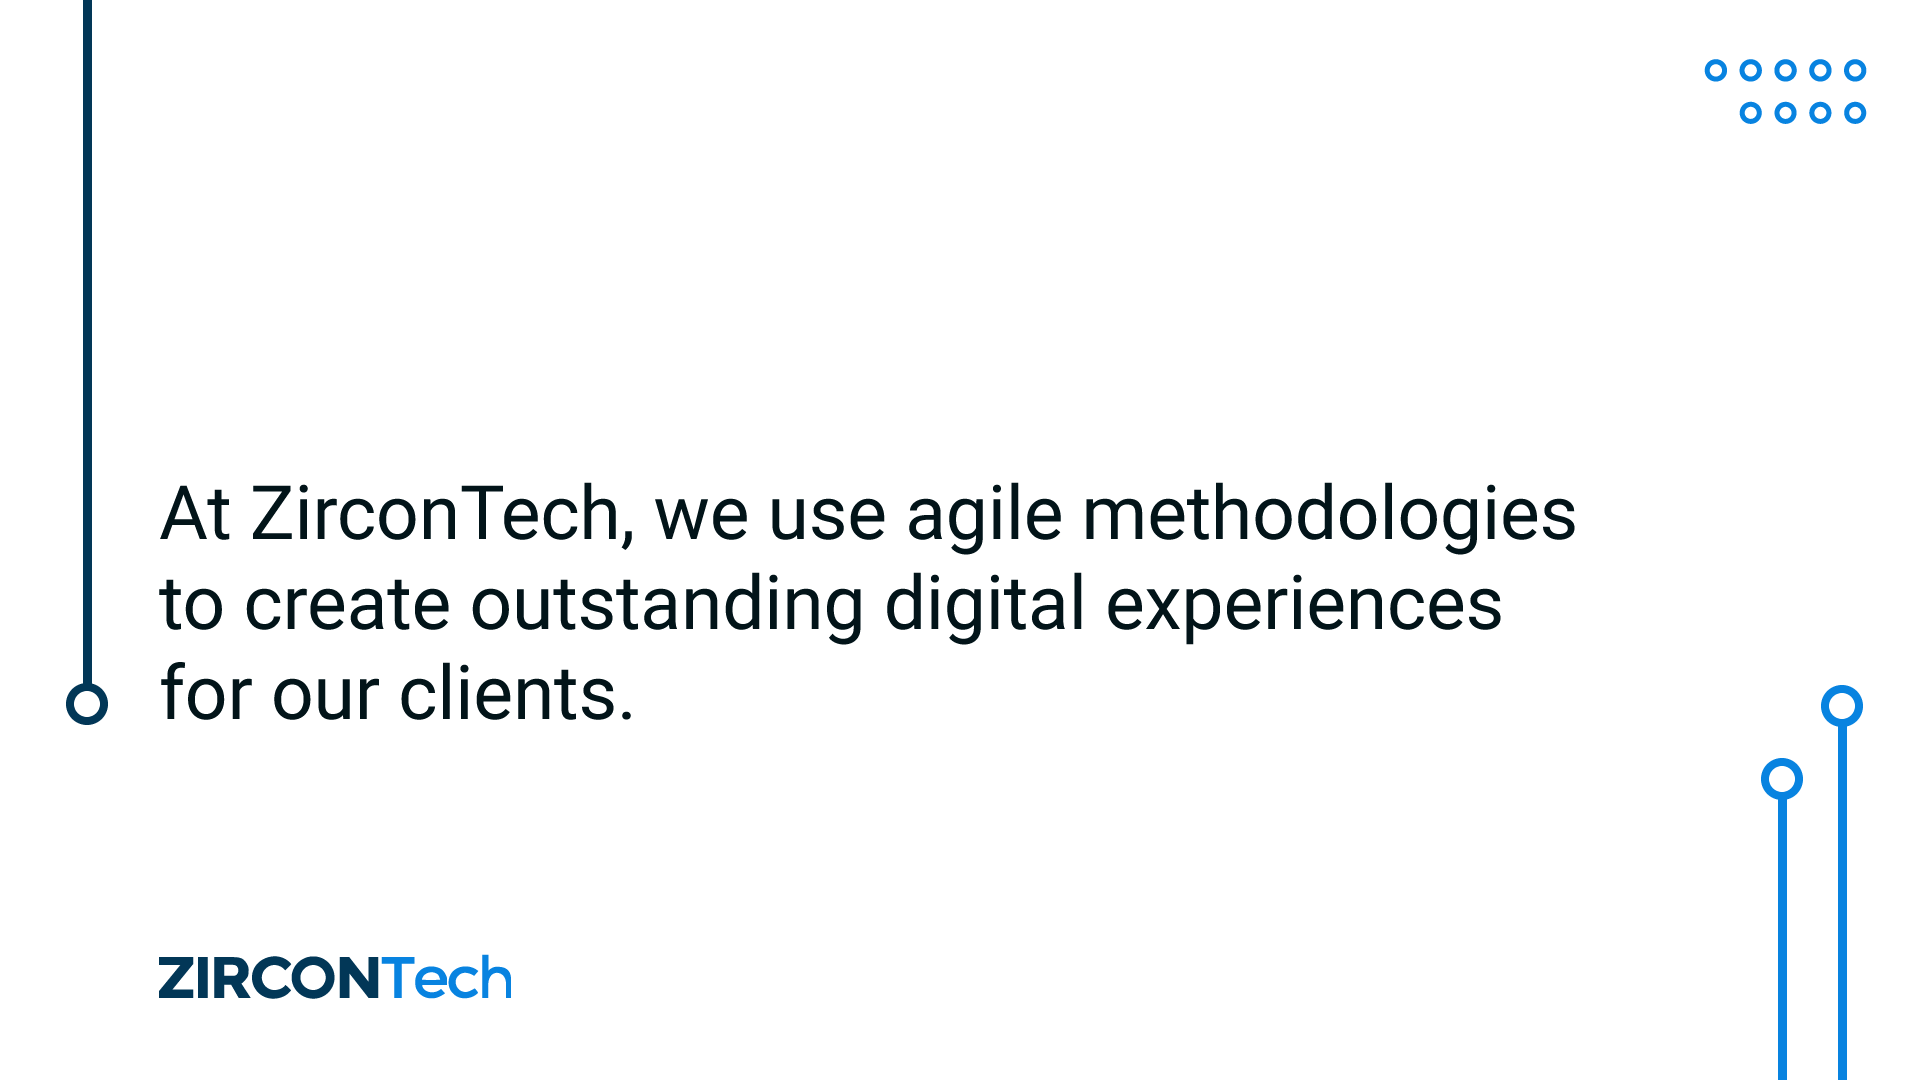 ZirconTech use agile methodologies to create outstanding digital experiences for clients